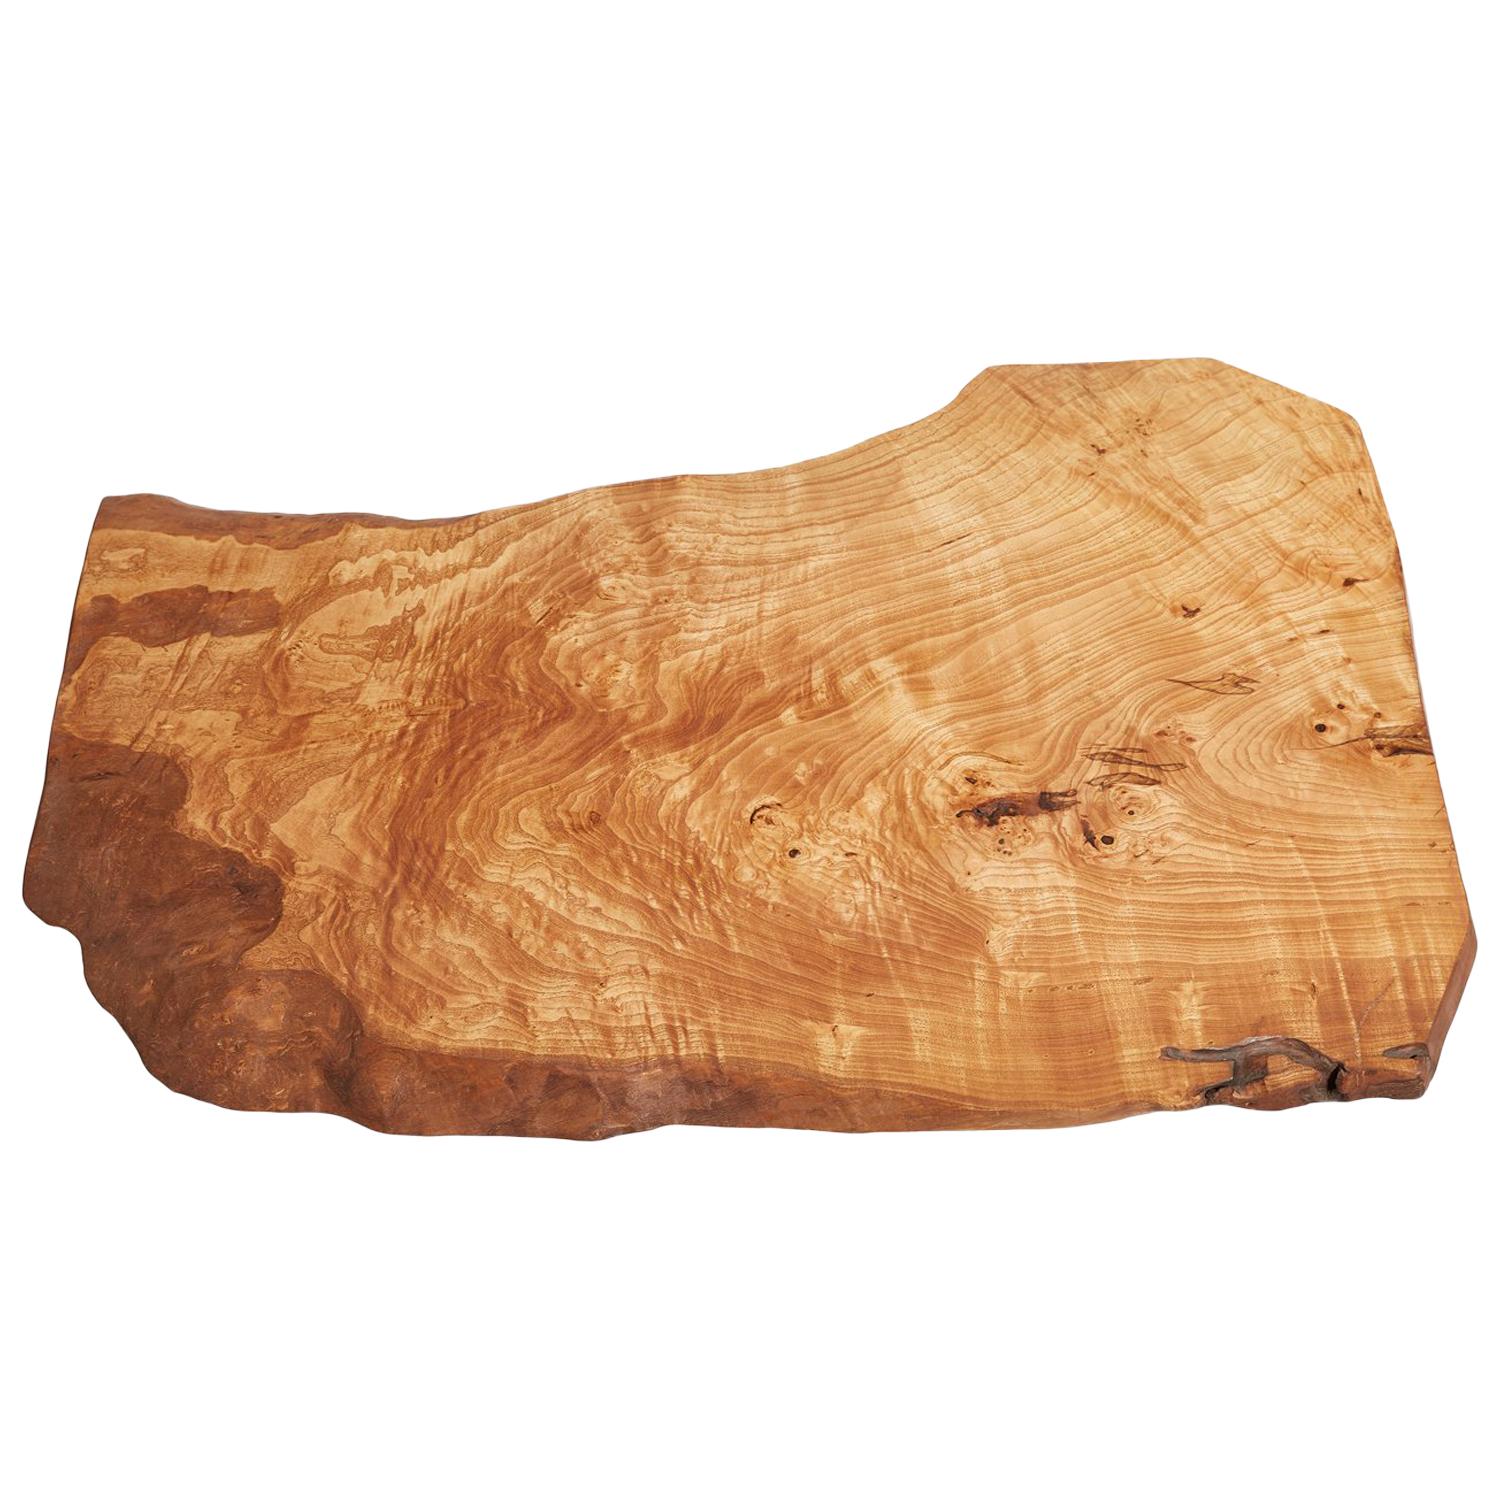 Ash Tree Live Edge Coffee Table, Live Edge Table, Rustic Edge End Table For Sale